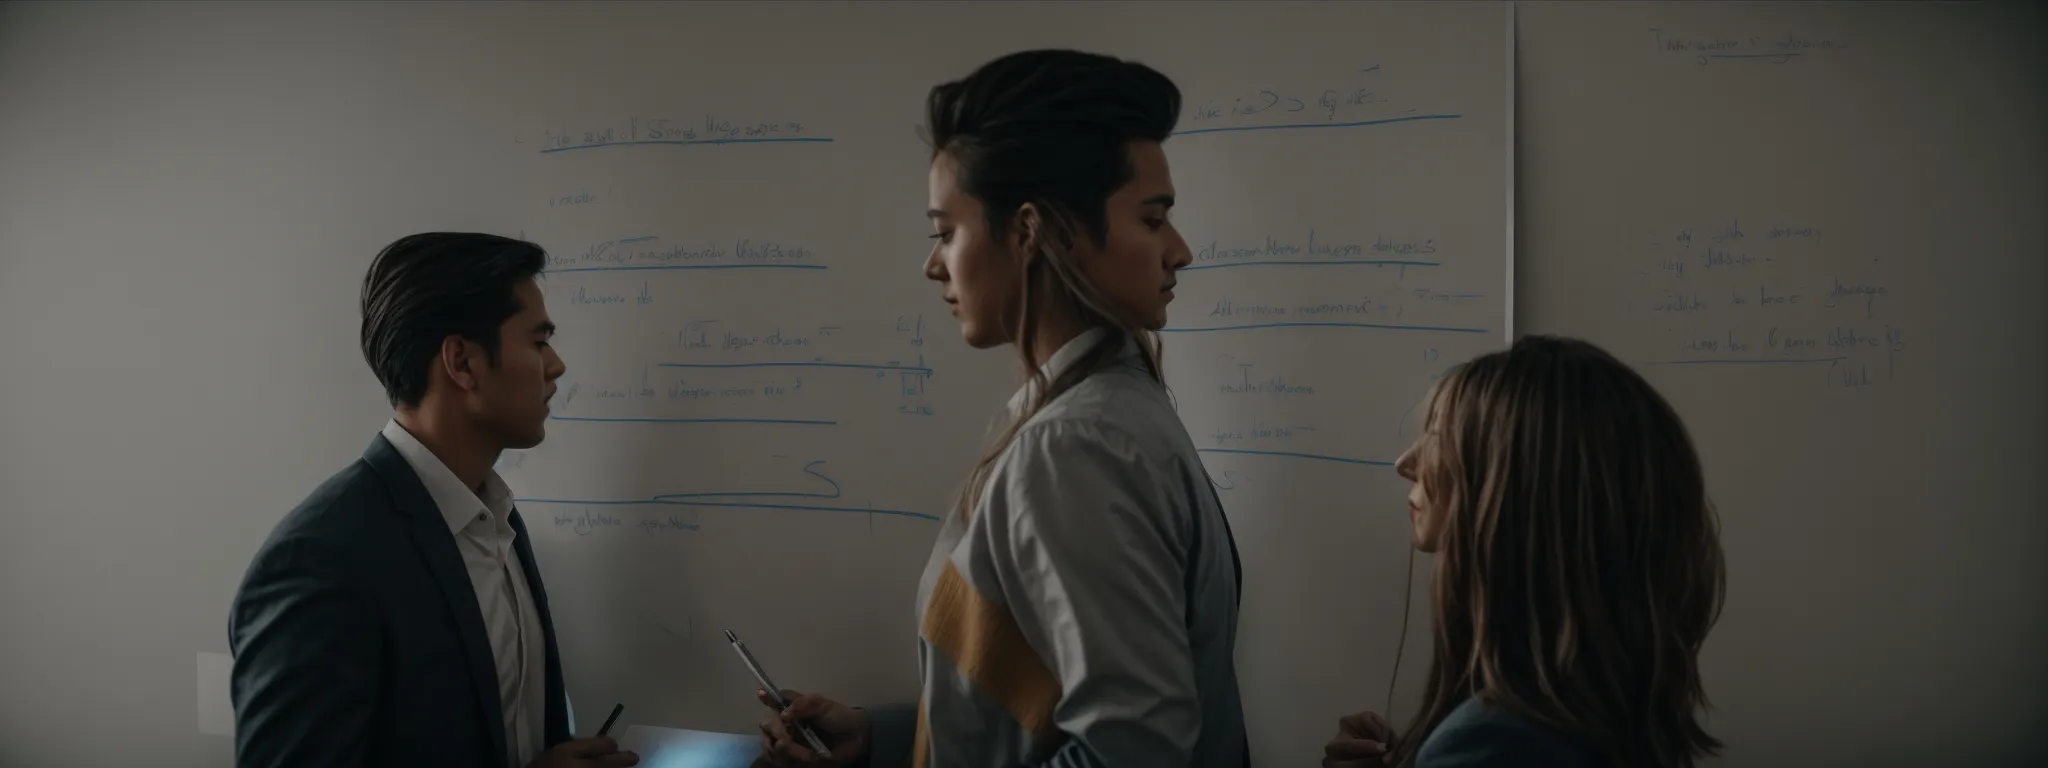 a man and woman highlighting key points on a whiteboard strategy session.